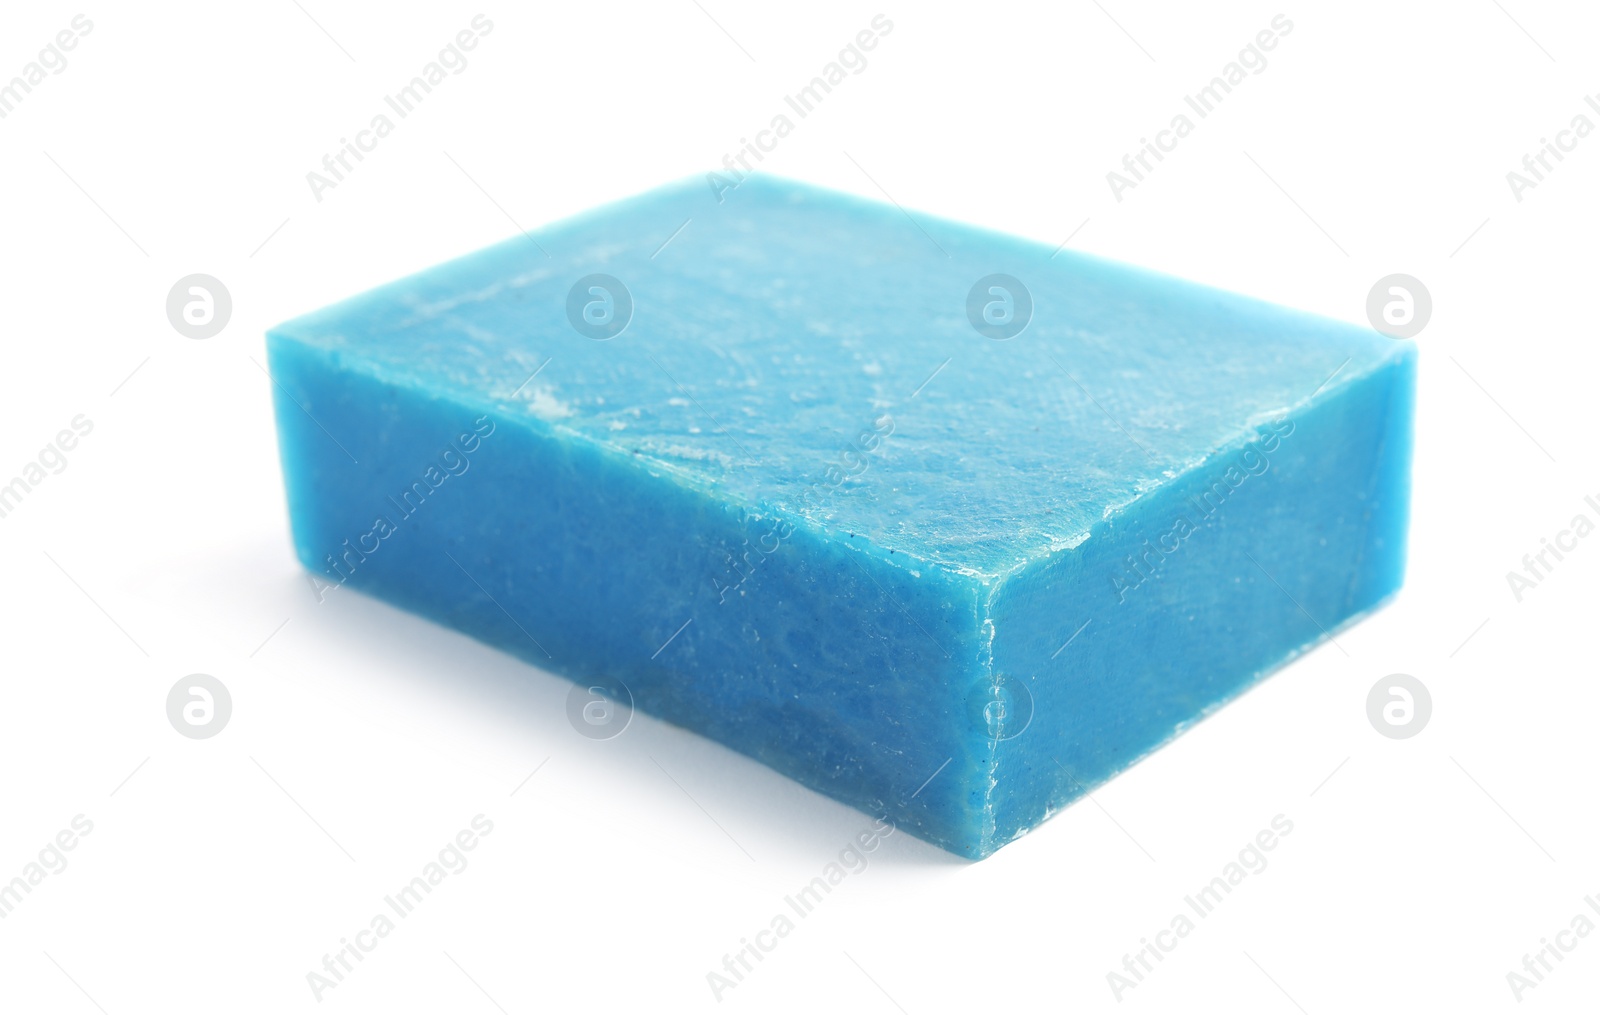 Photo of Hand made soap bar on white background